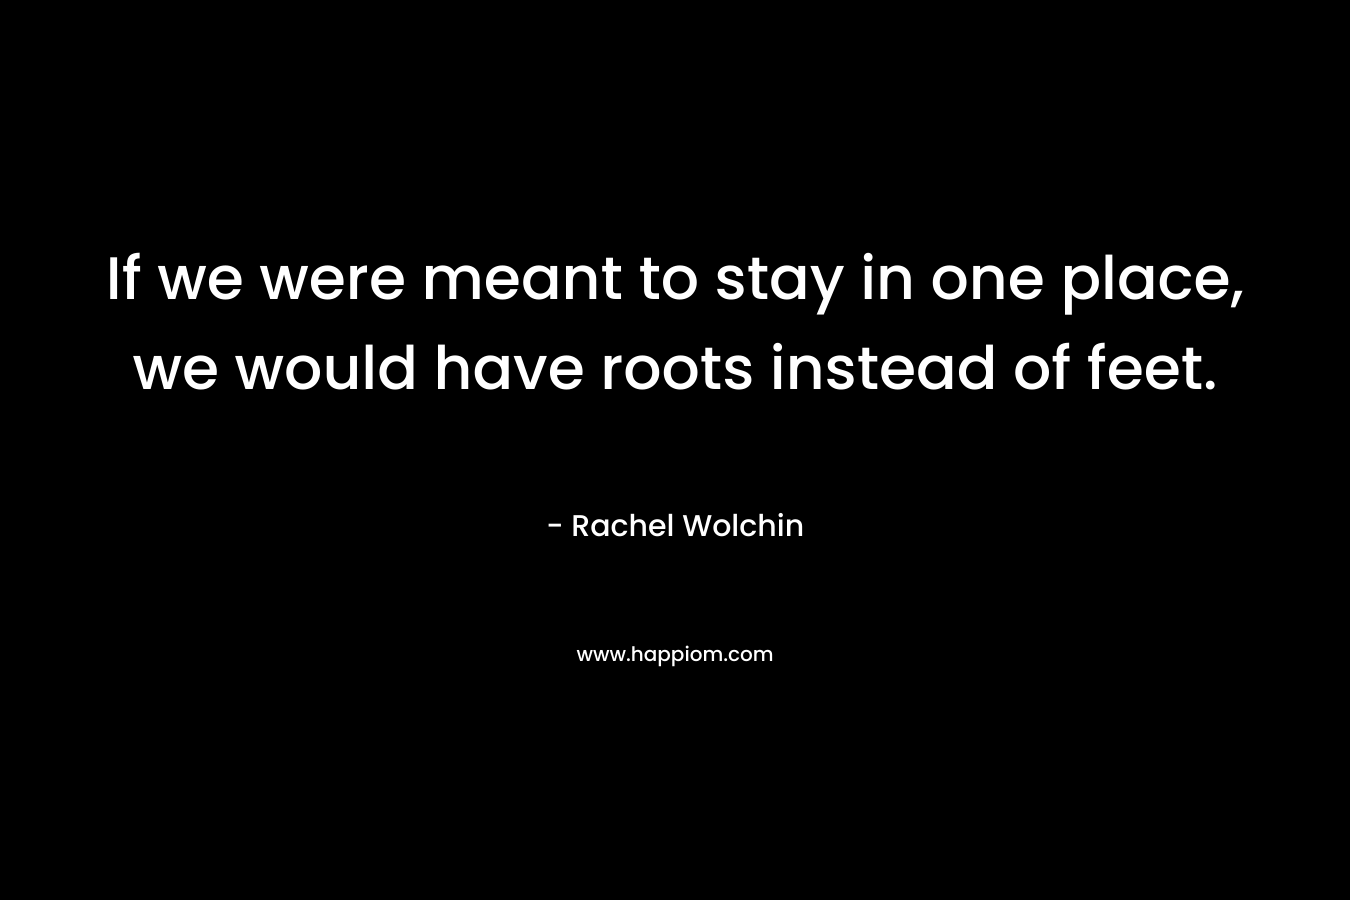 If we were meant to stay in one place, we would have roots instead of feet.